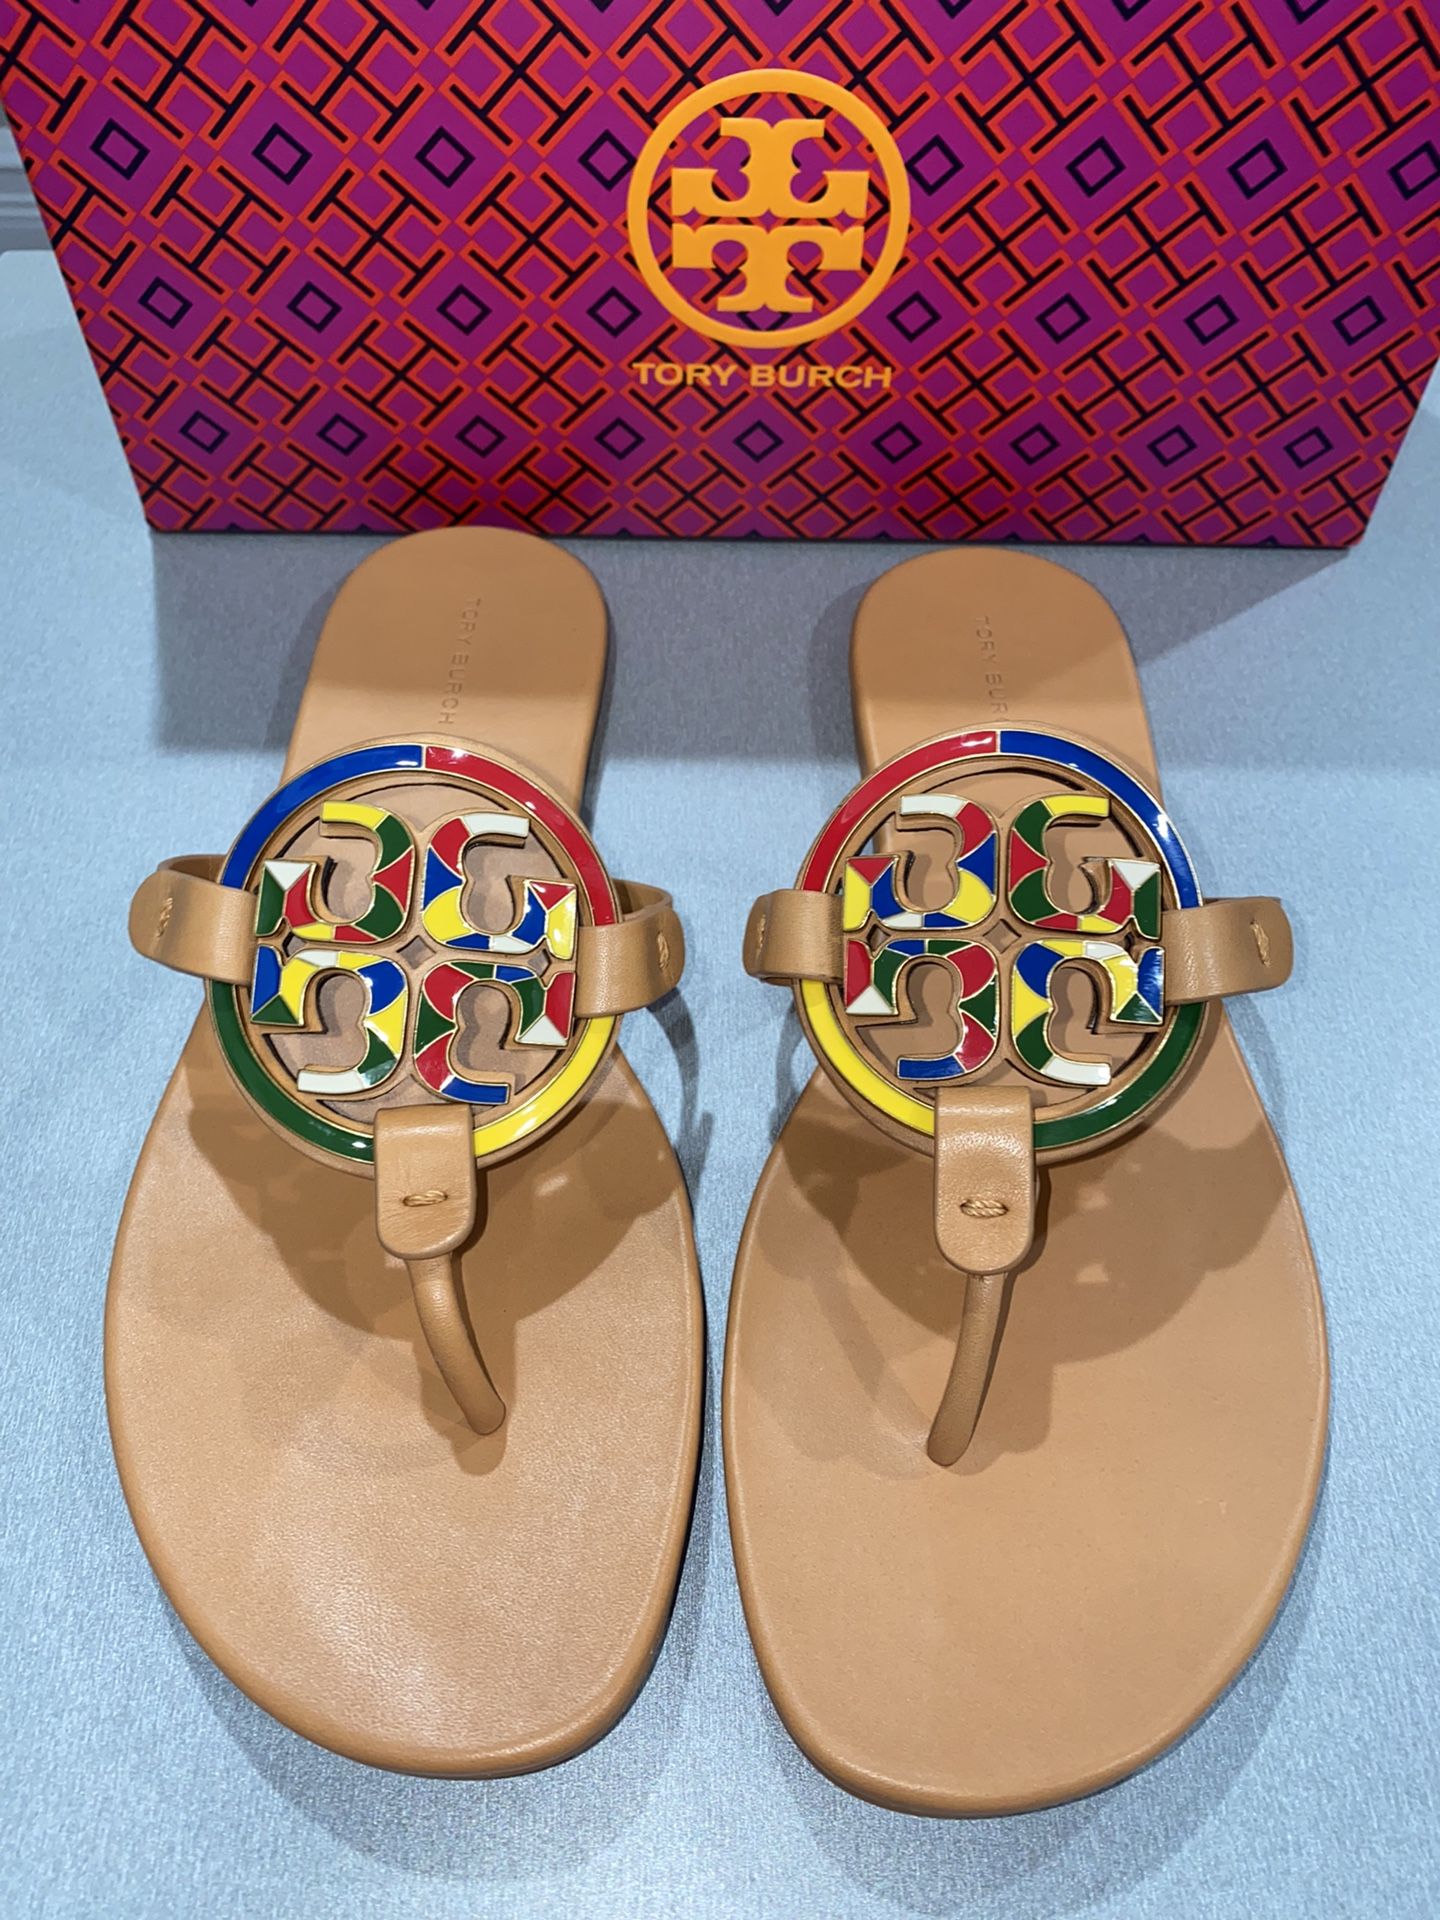 Tory Burch Women's Sandals for sale